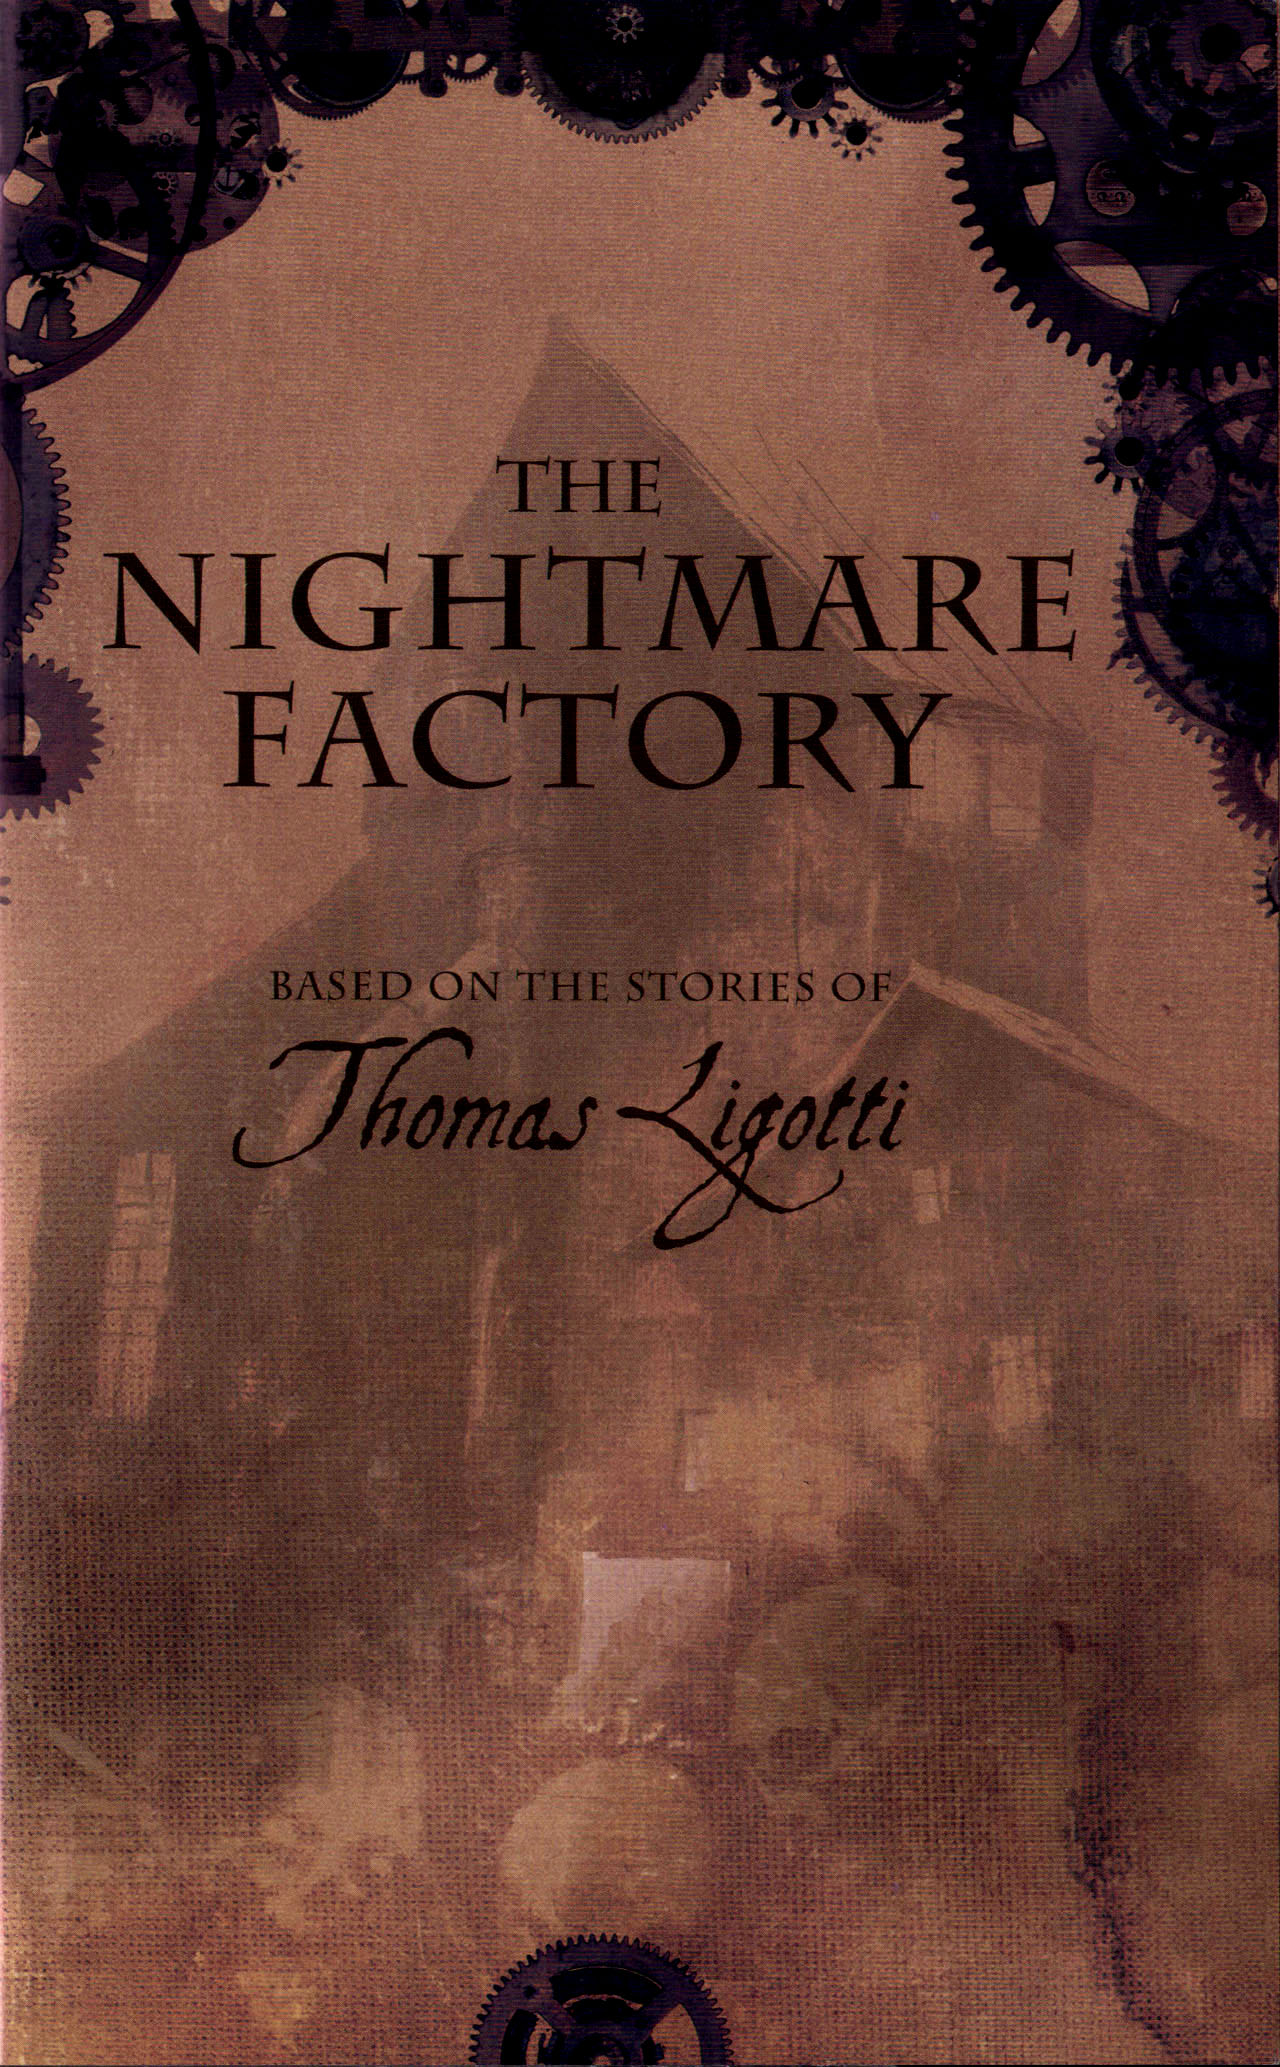 Read online The Nightmare Factory comic -  Issue # TPB - 3